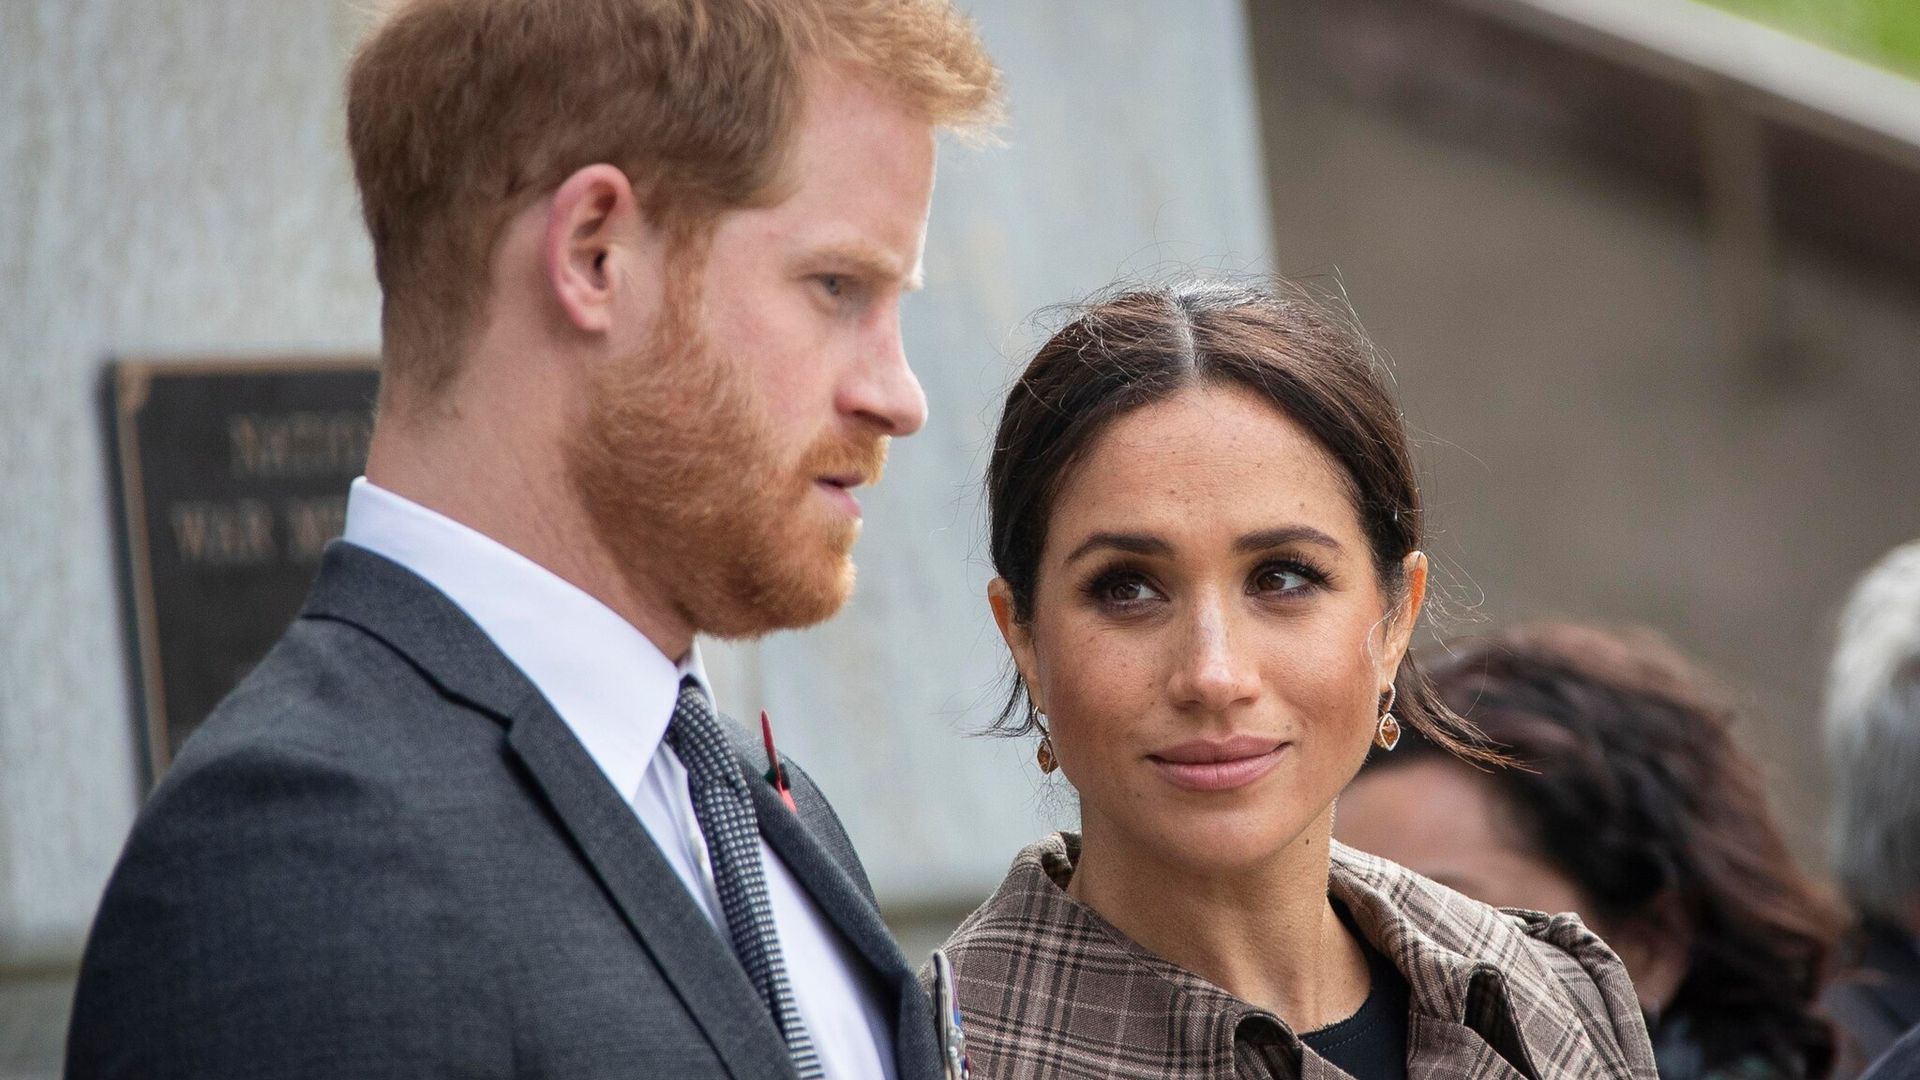 the duke and duchess of sussex have been left speechless by the situation in afghanistan